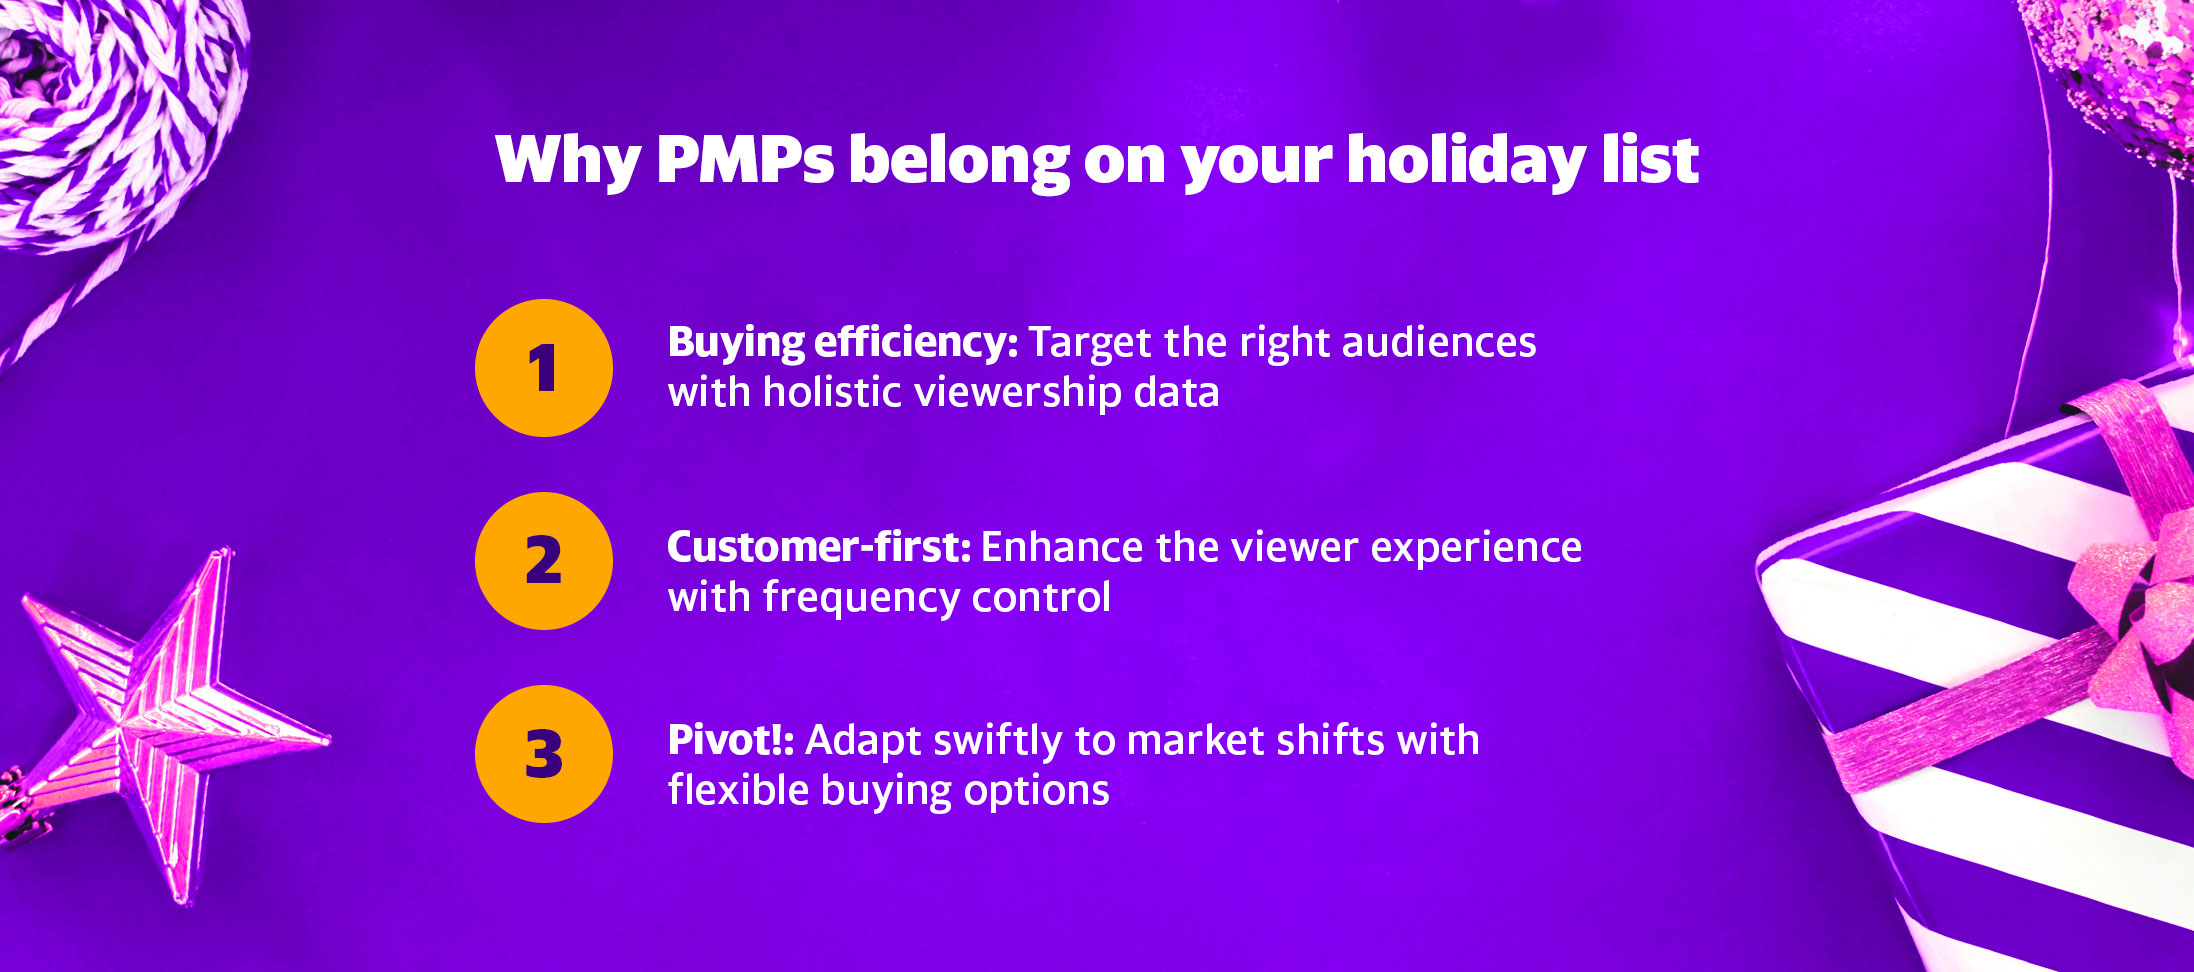 Why PMPs belong on your holiday list. 1. Buying efficiency: Target the right audiences with holistic viewership data. 2. Customer-first: Enhance the viewer experience with frequency control. 3. Pivot!: Adapt swiftly to market shifts with flexible buying options